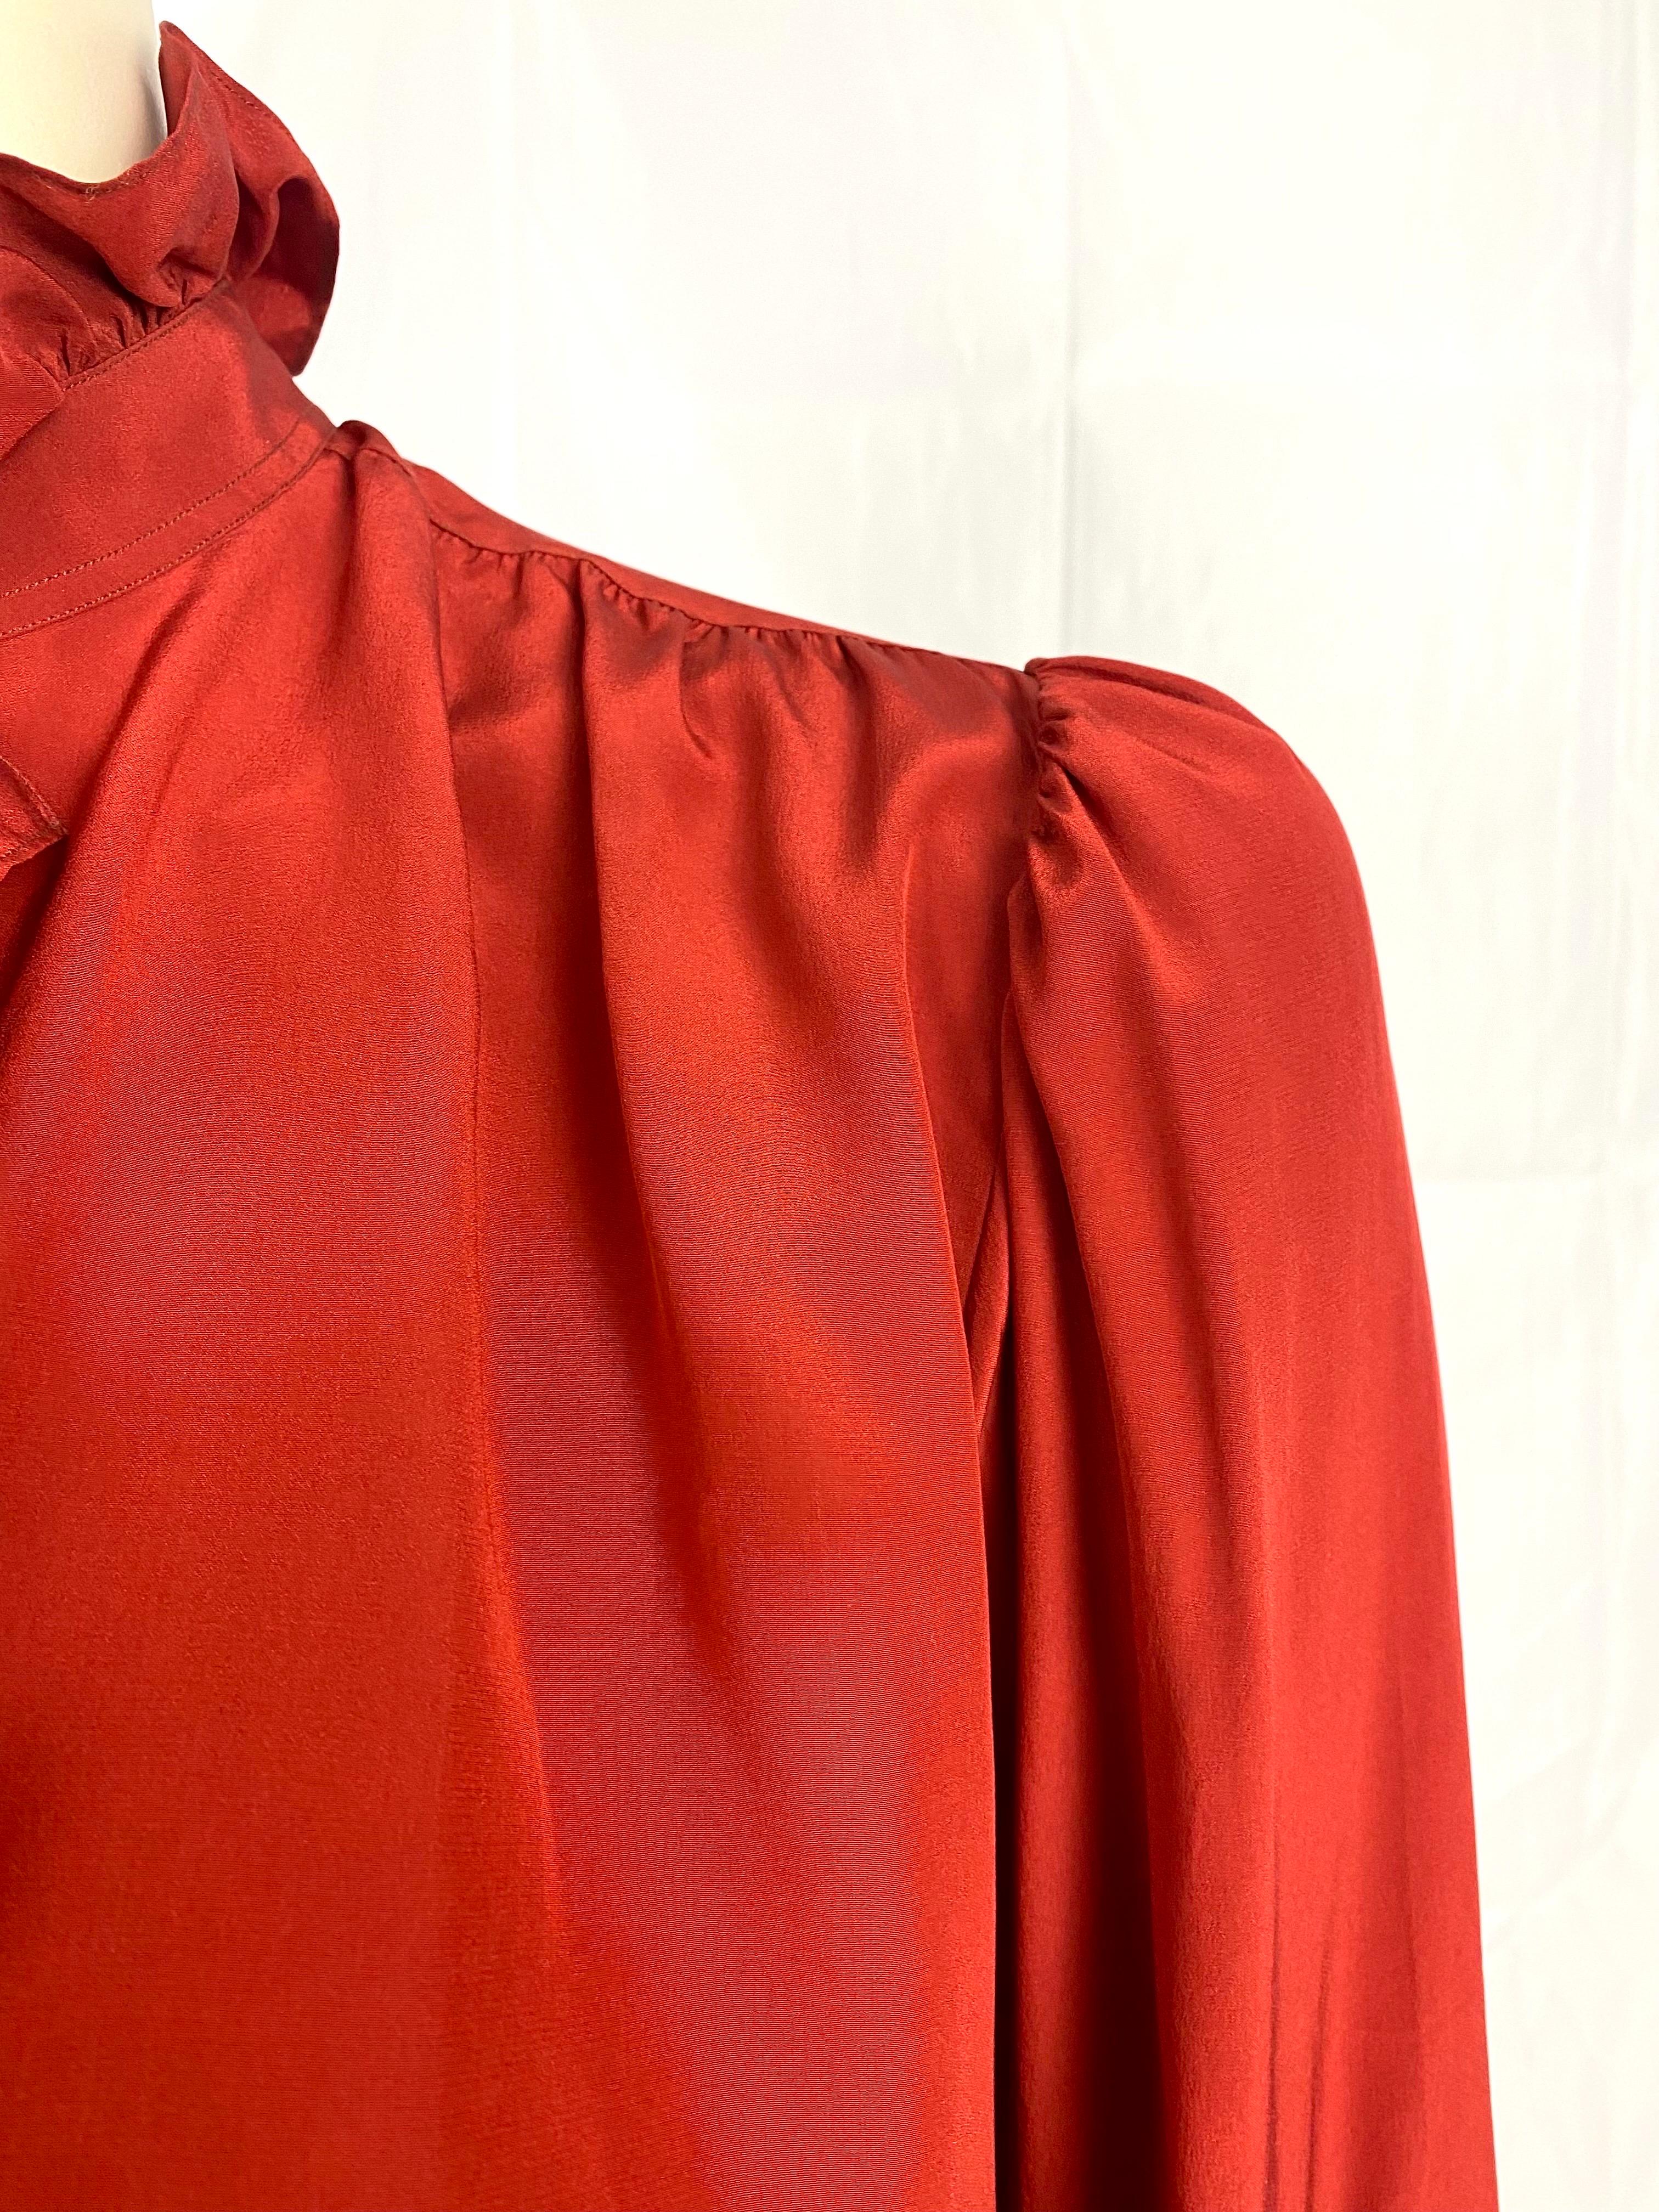 Vintage Yves saint Laurent Rive Gauche blouse from 1970. Cardinal Red. For Sale 1